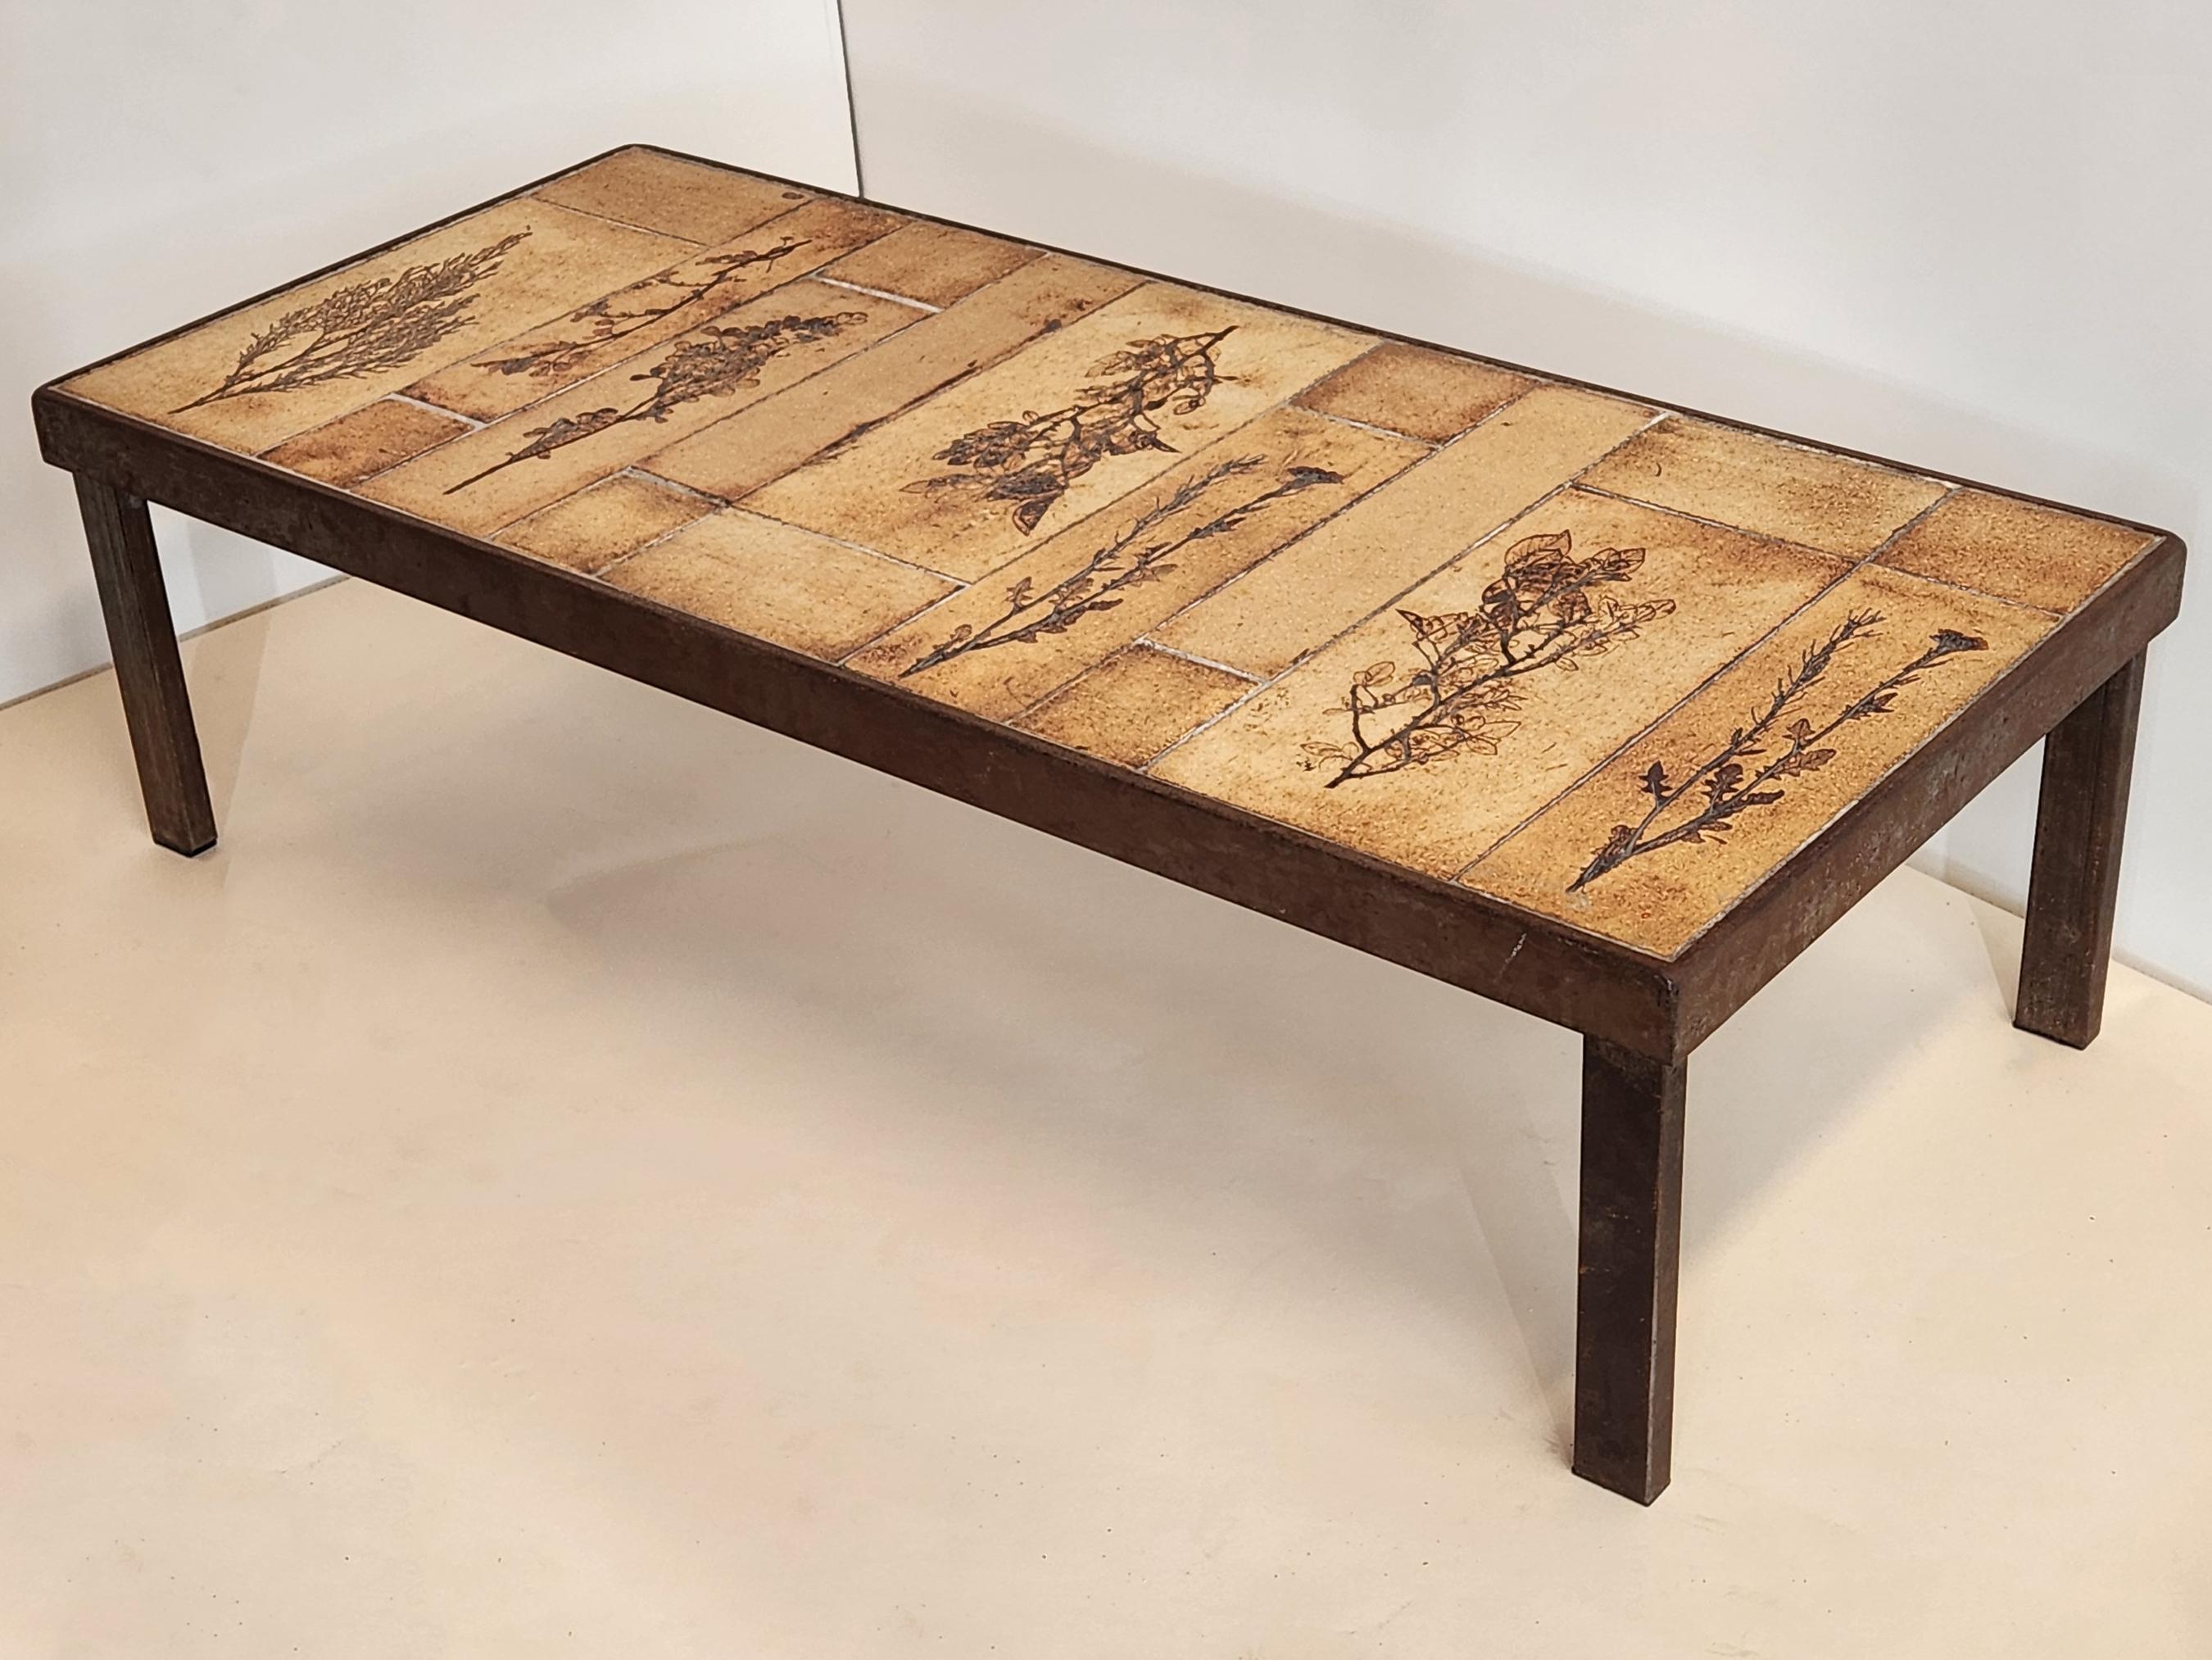 Roger Capron - Coffee Table, Garrigue Ceramic Tiles on Dovetail Metal Frame